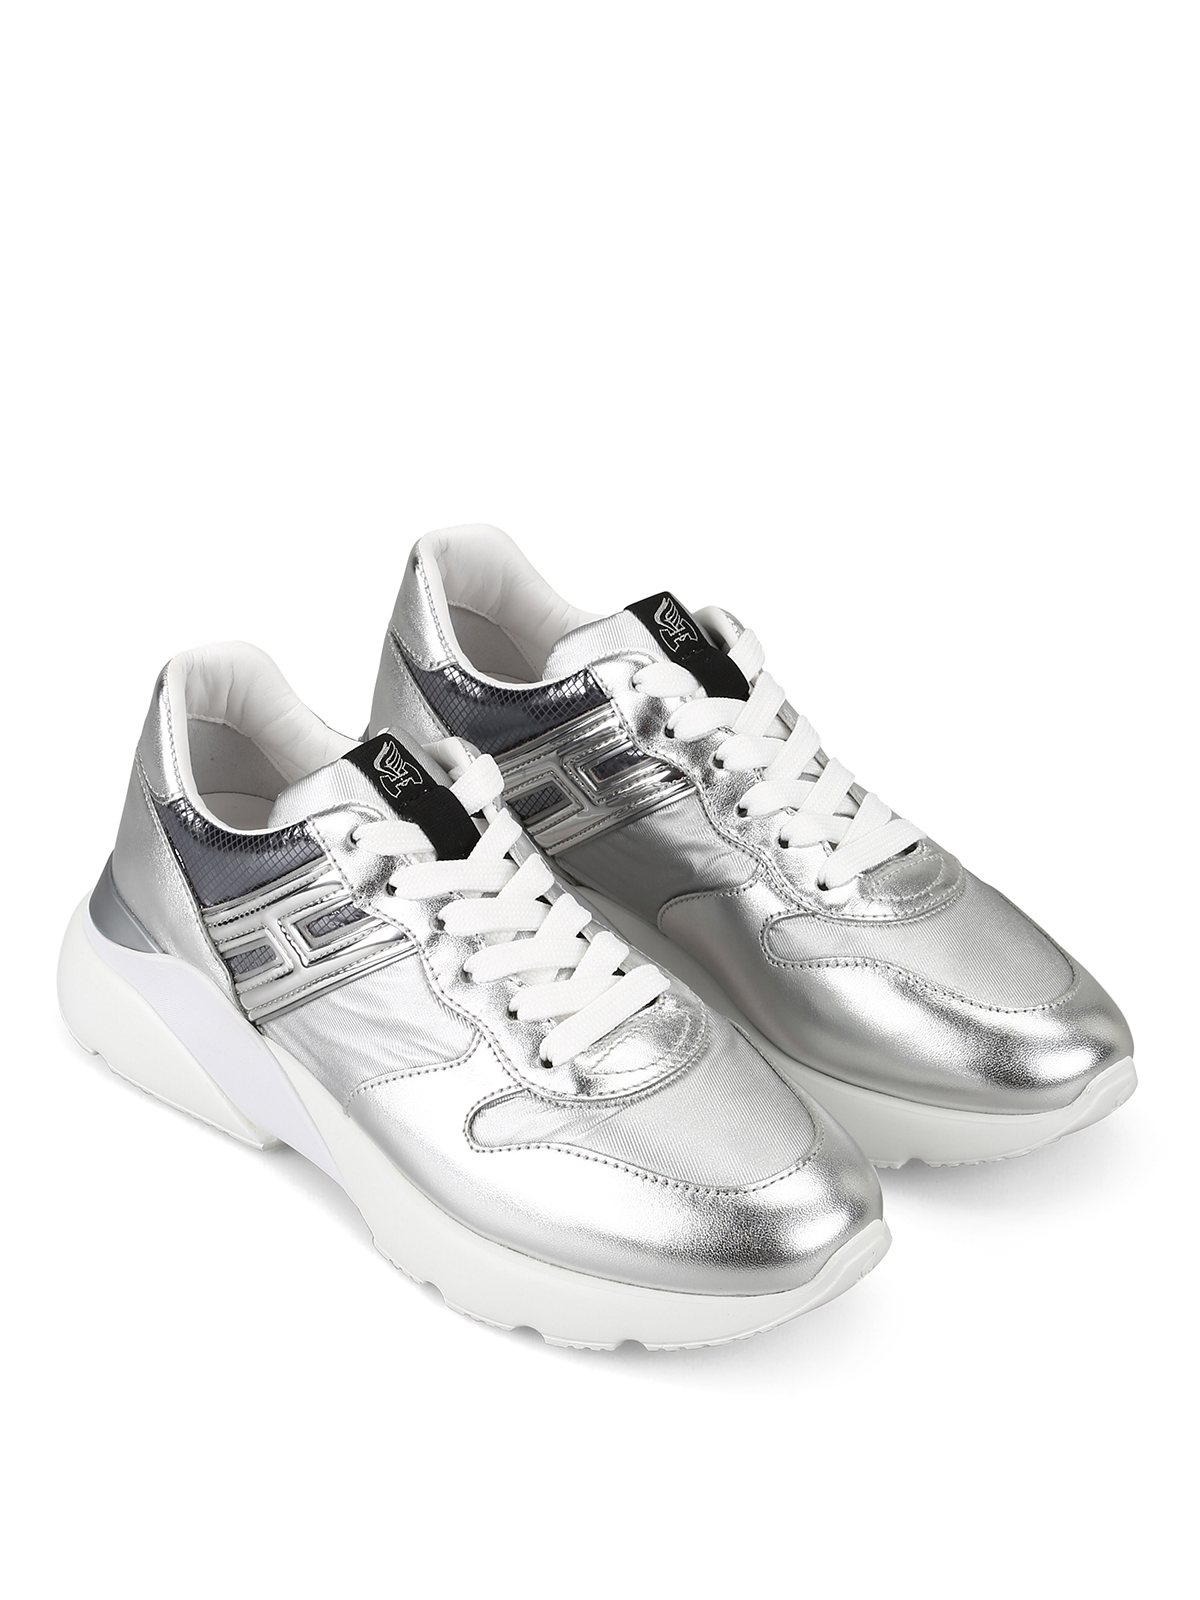 Hogan Active One silver sneakers